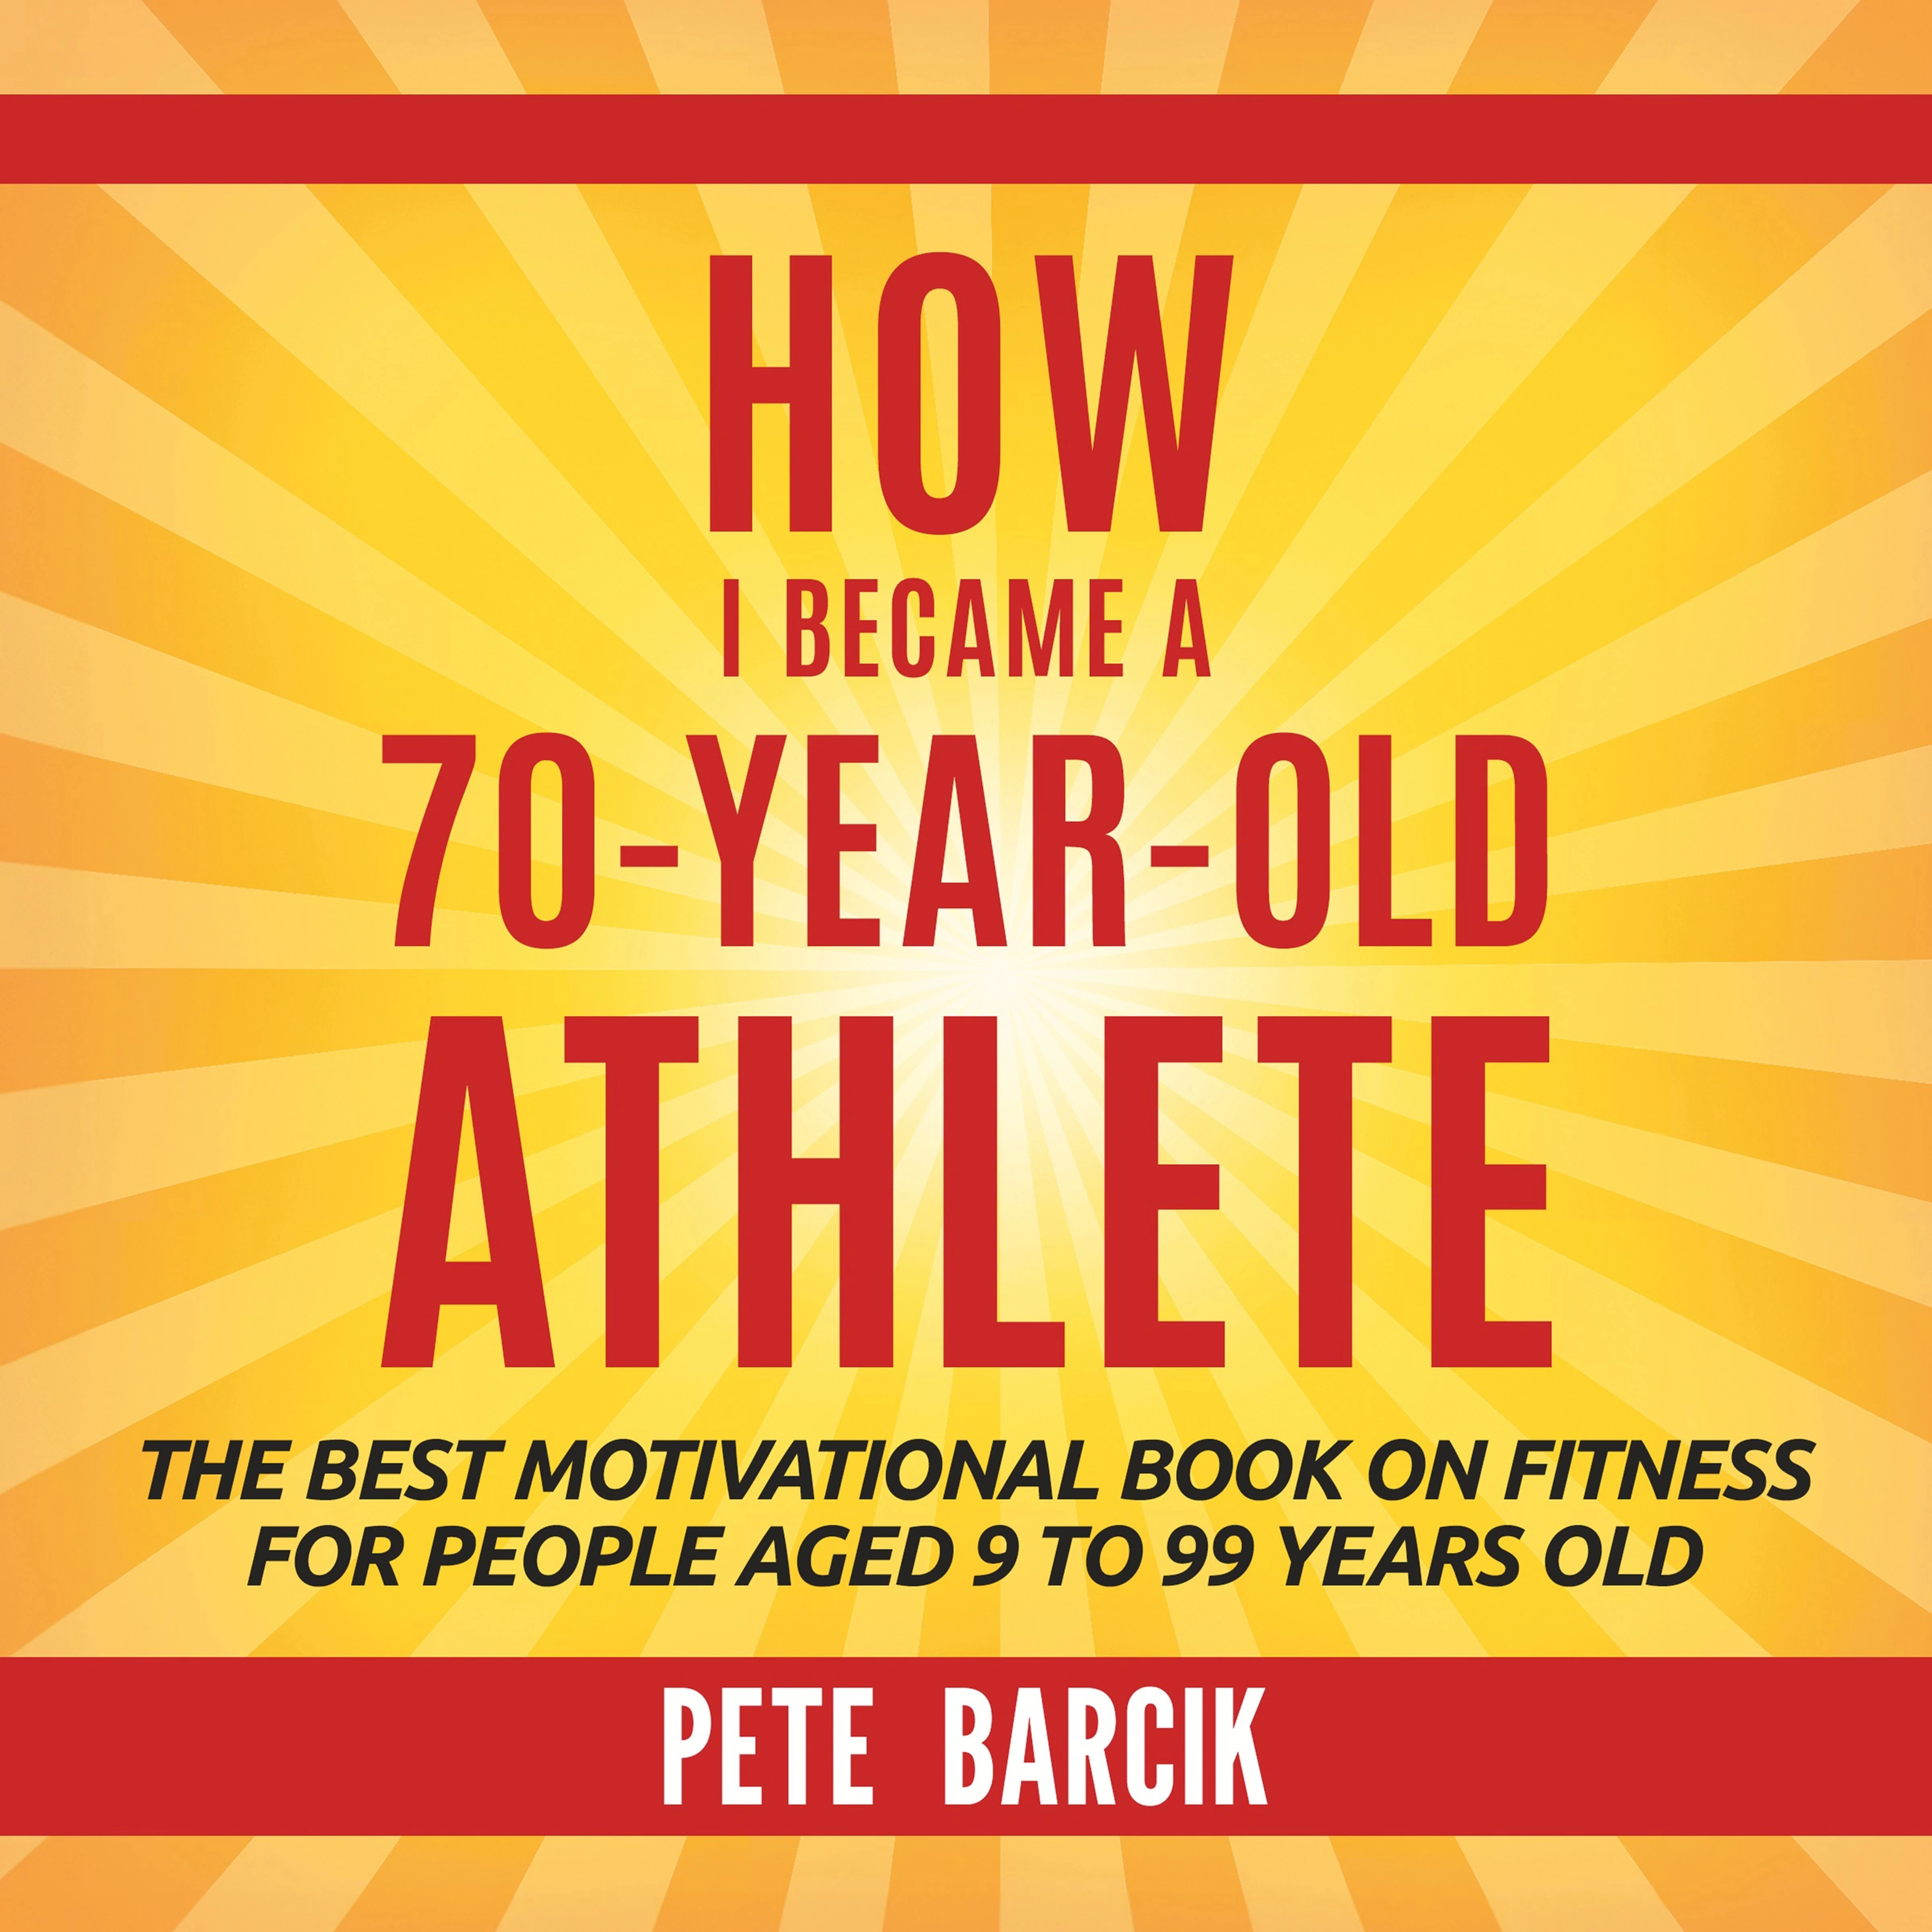 How I Became a 70 yr old Athlete Audiobook by Pete Barciik